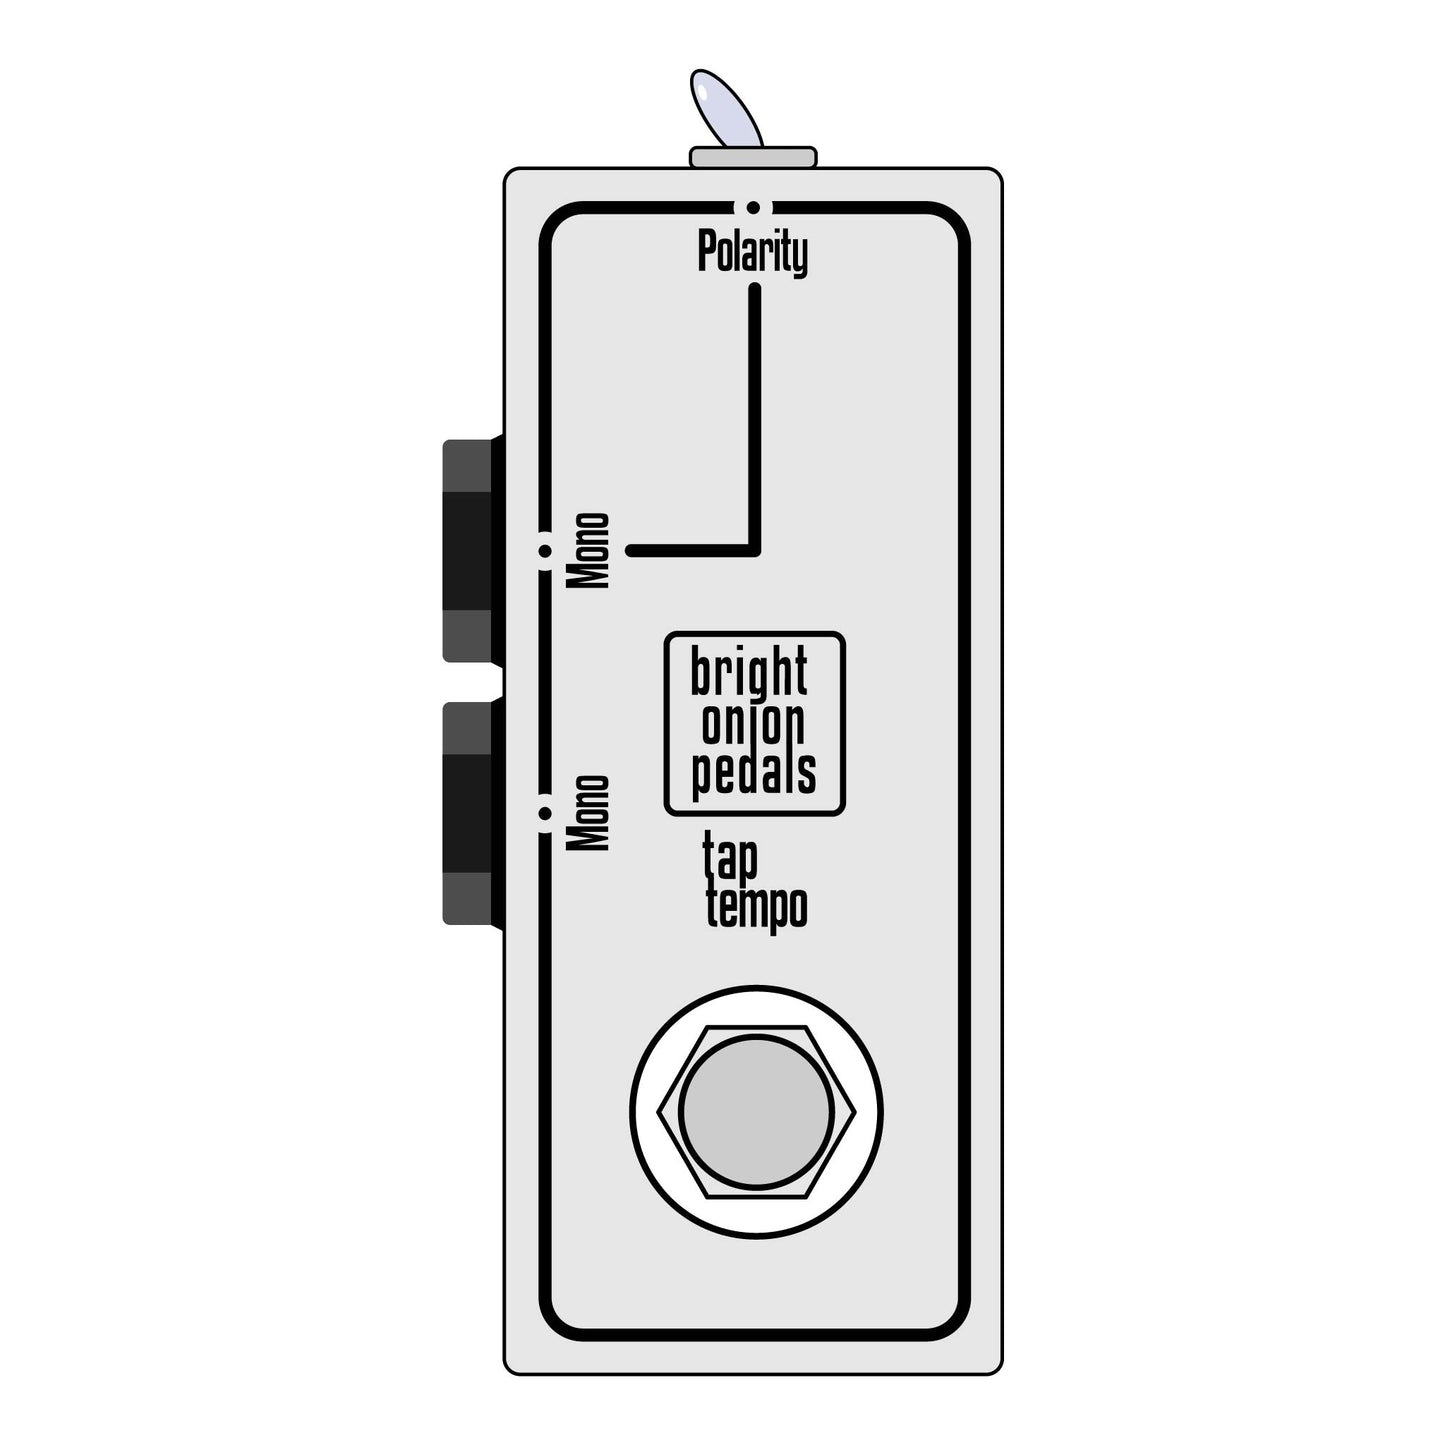 Dual Tap Tempo Switch with Polarity Switch - Bright Onion Pedals